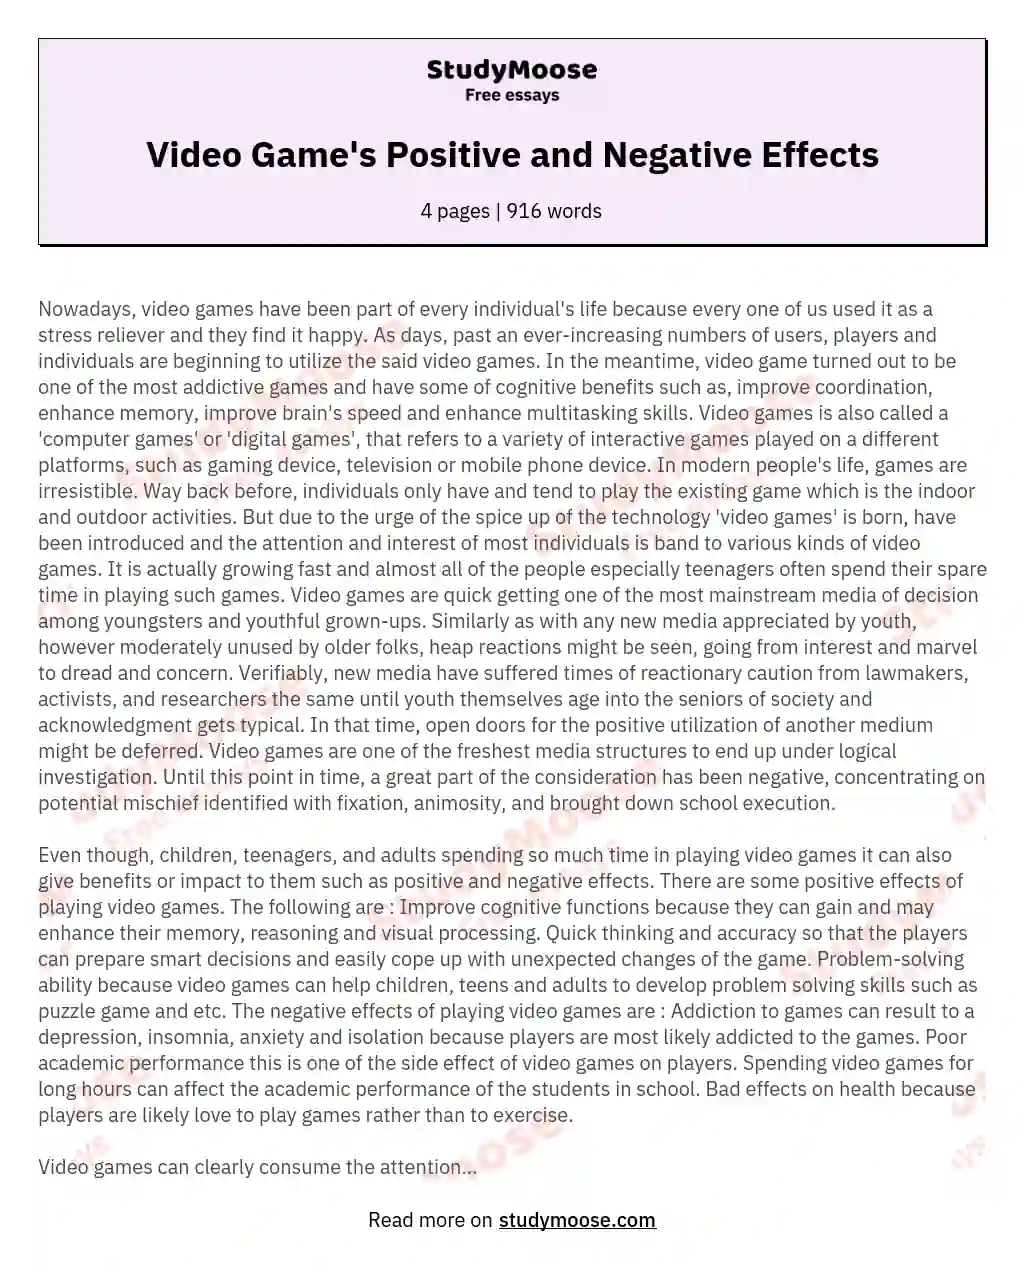 Video Game's Positive and Negative Effects essay